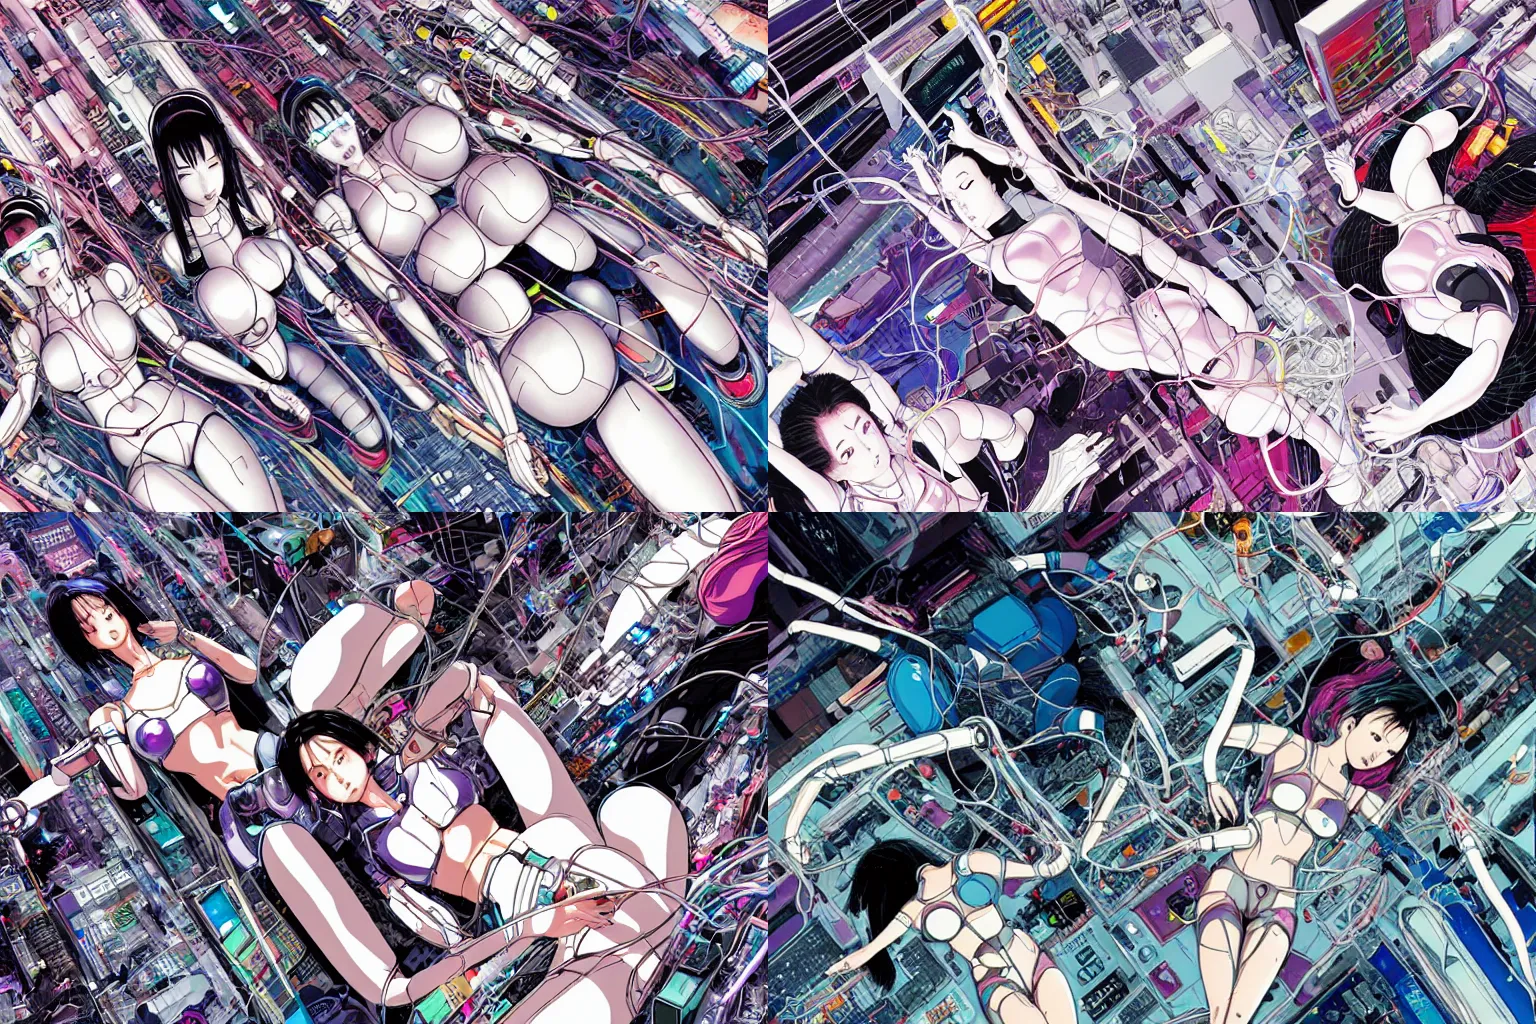 Prompt: a cyberpunk illustration of a group of super coherent female androids in style of yukito kishiro, lying on an abstract, empty, white floor with their body parts scattered around in various poses and cables and wires coming out, by masamune shirow and katsuhiro otomo, hyper-detailed, intricate, colorful, view from above